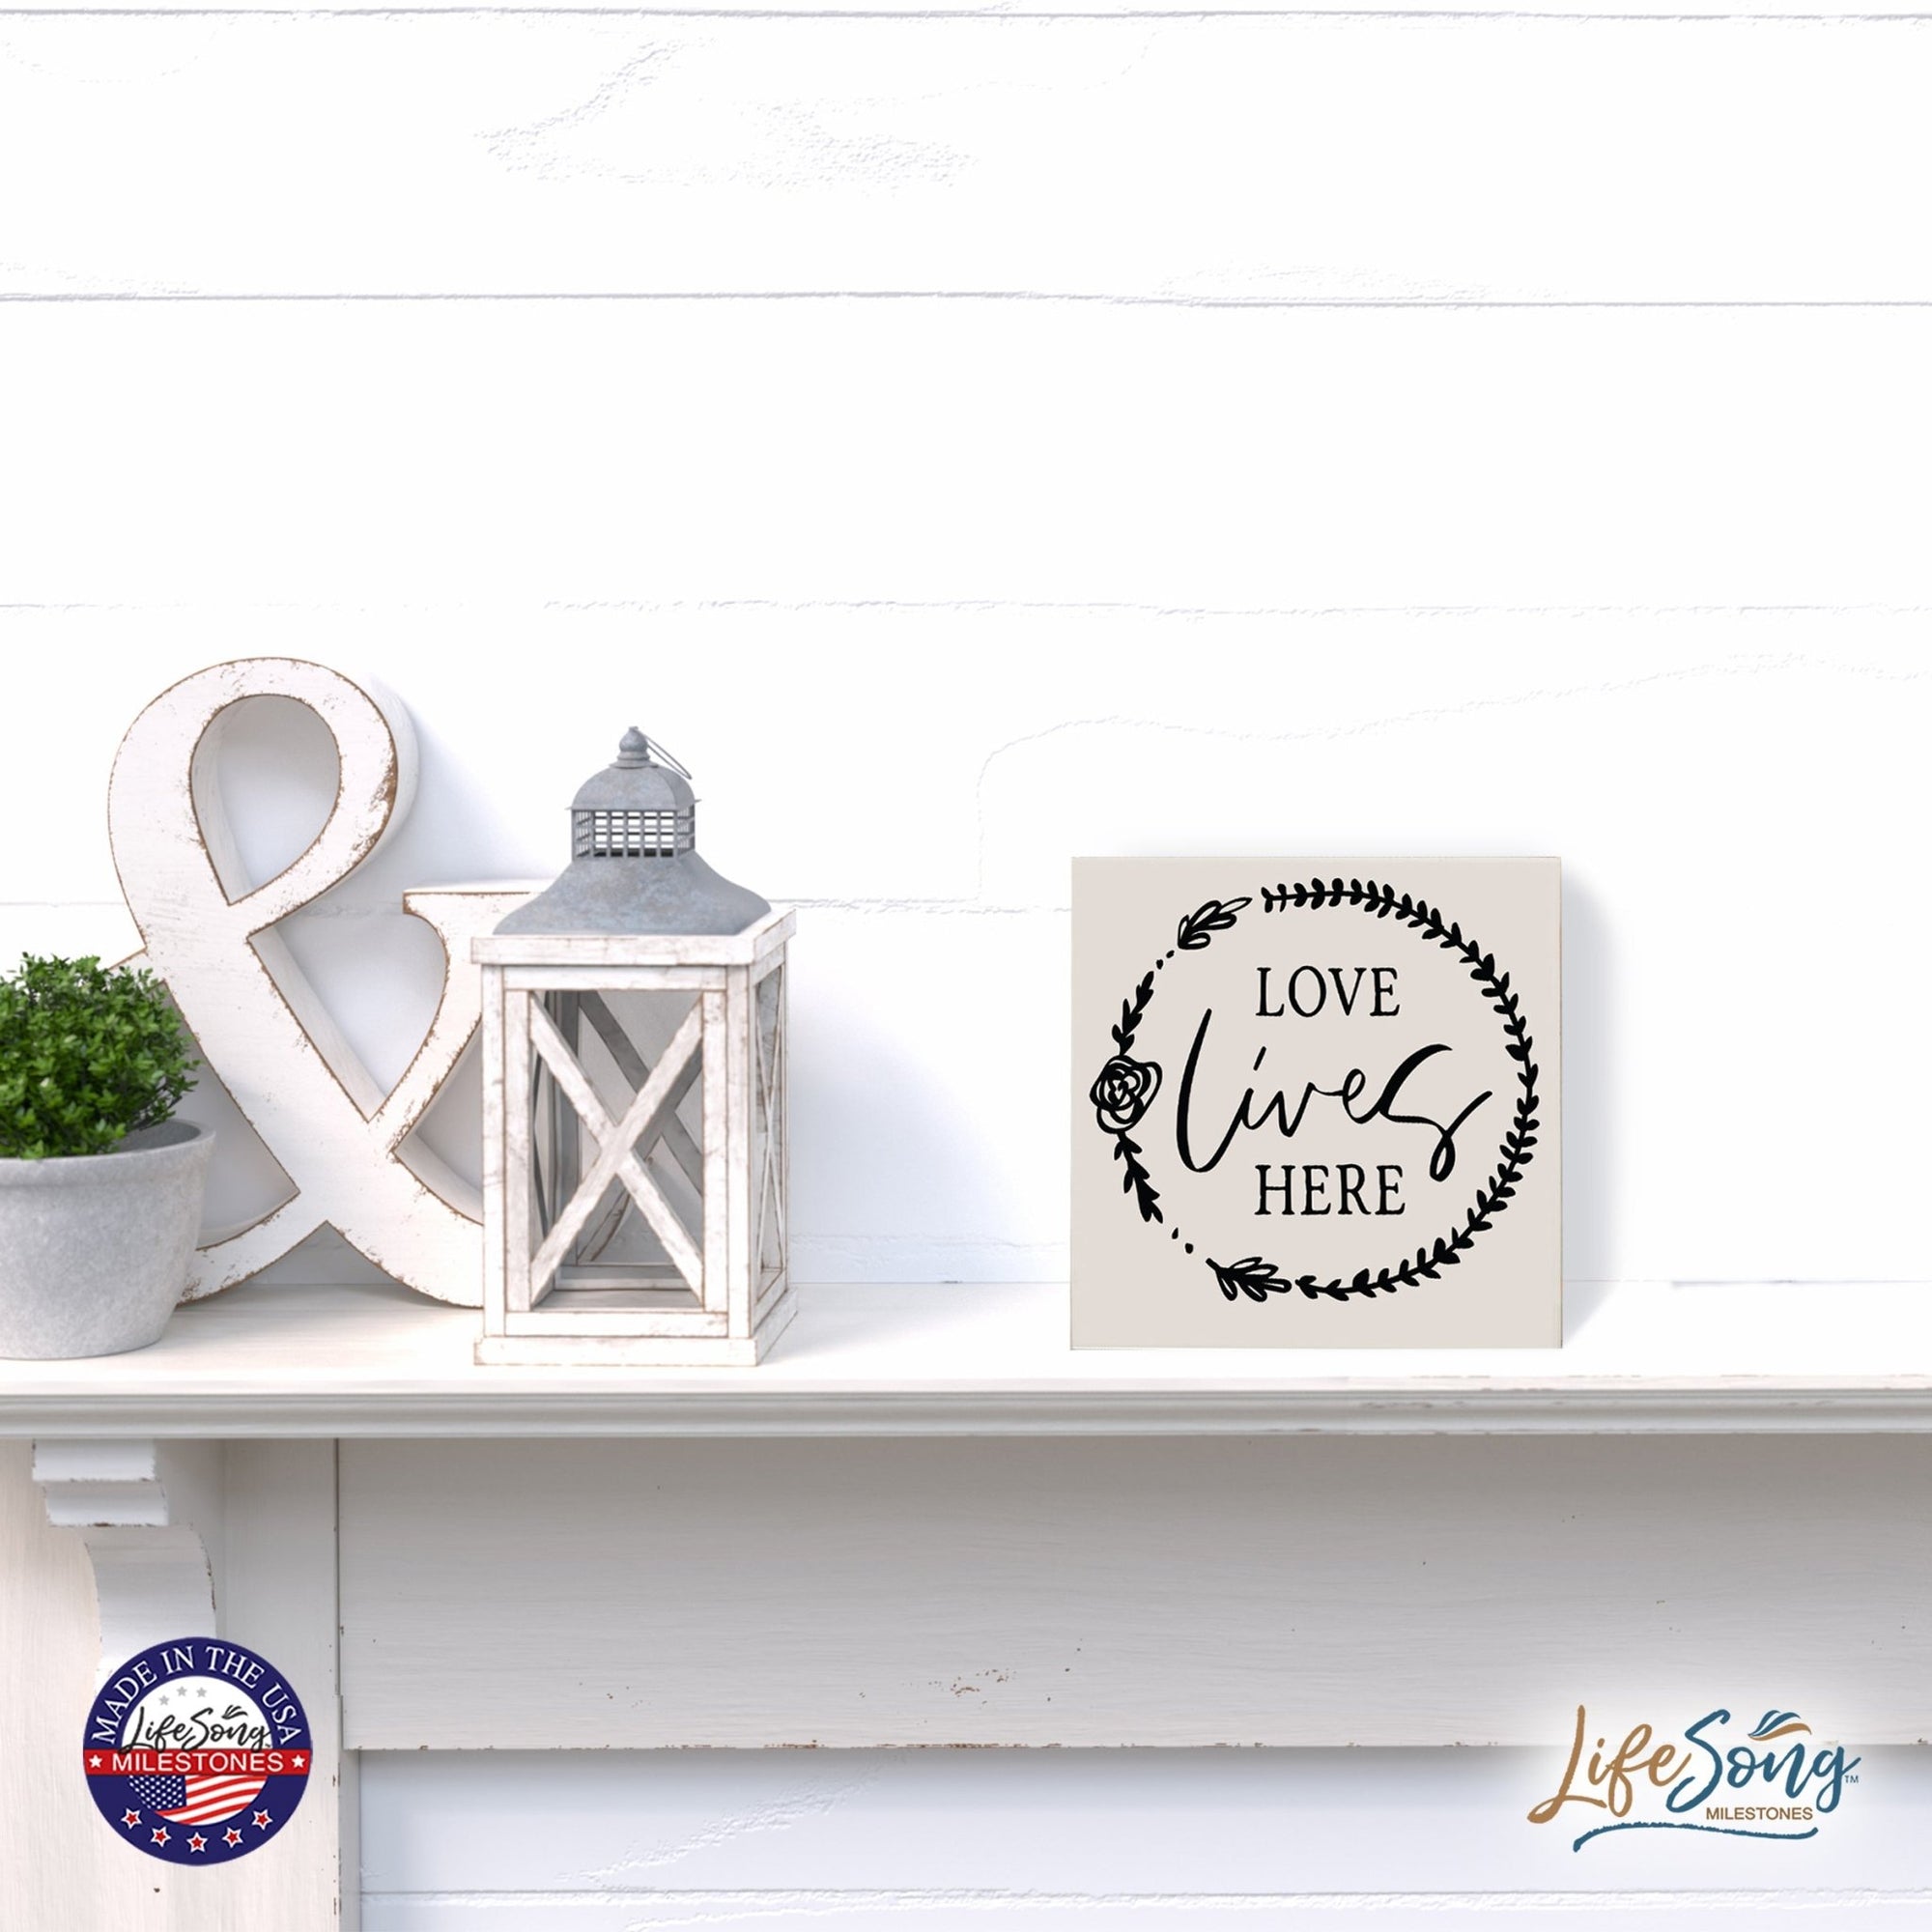 Modern Inspirational Shadow Box for Everyday Home Decorations 6x6 - Love Lives Here - LifeSong Milestones